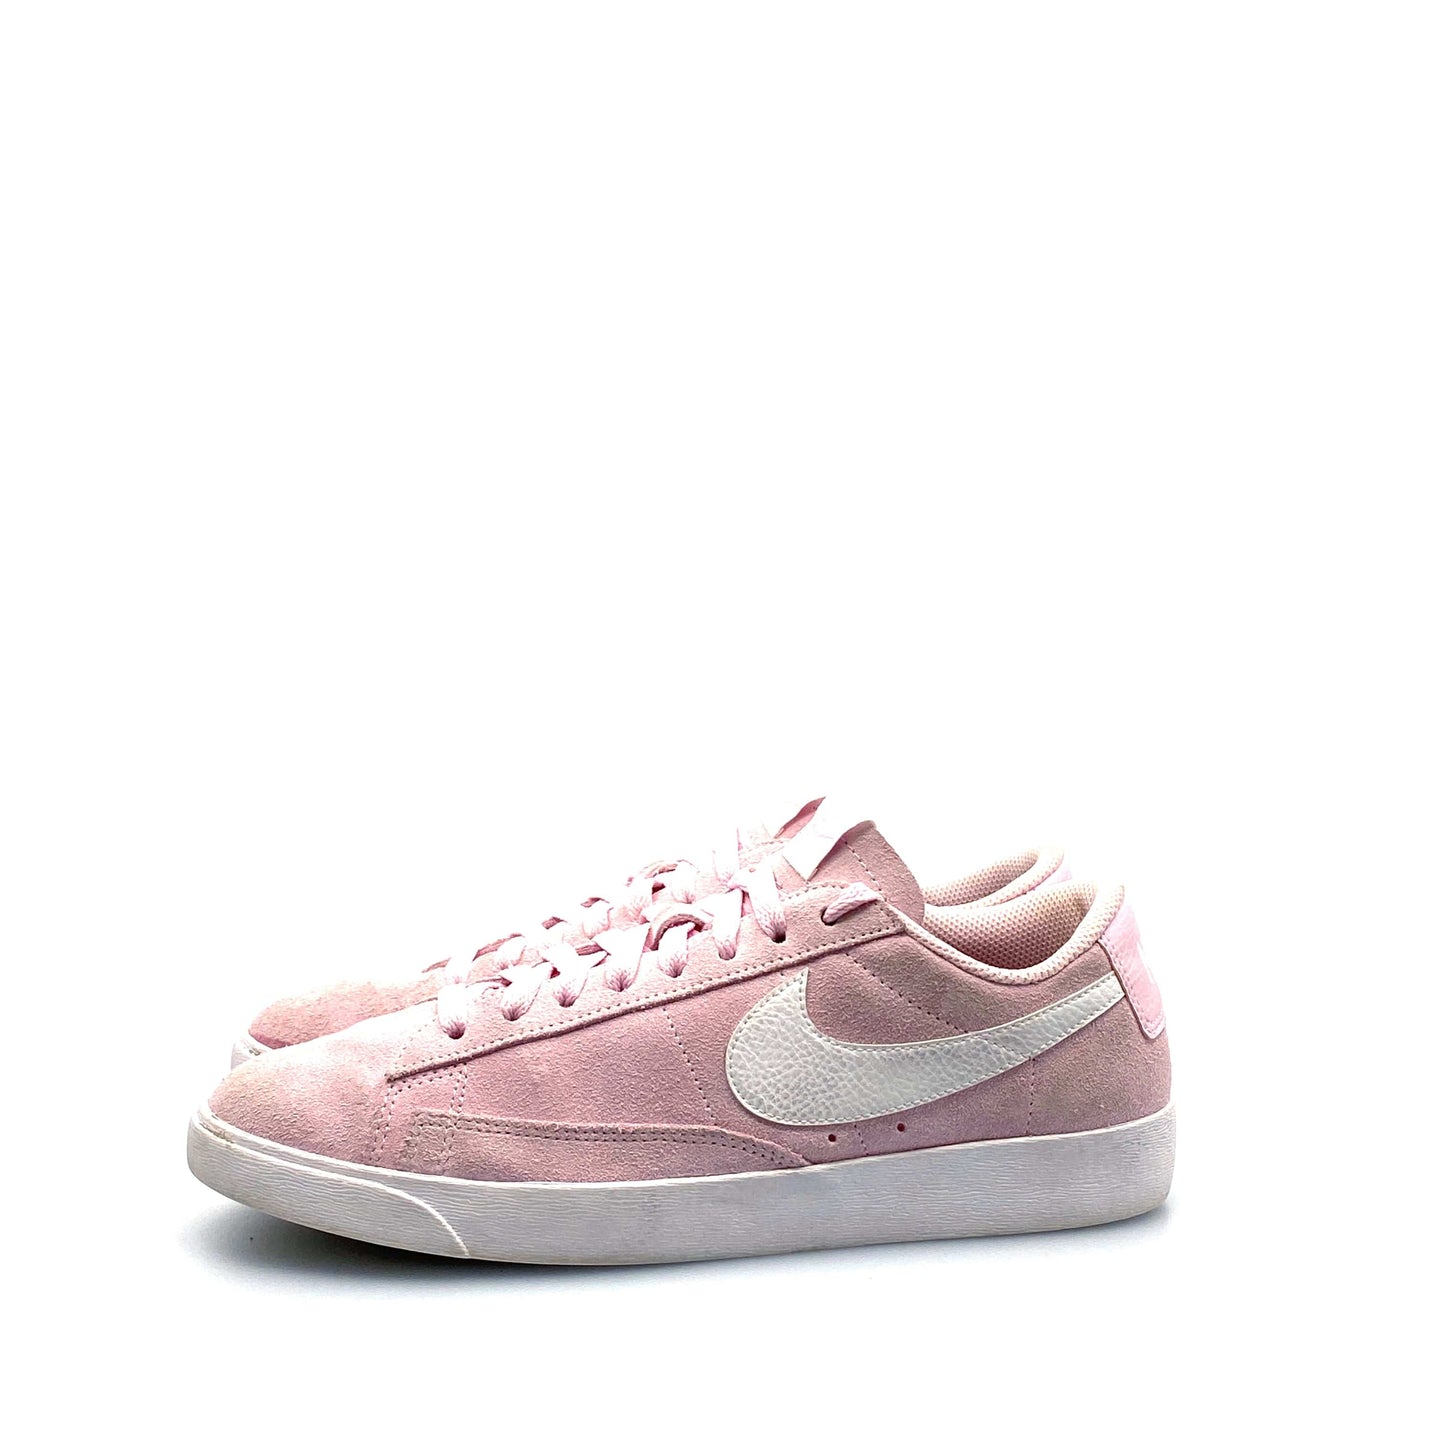 Nike Womens Blazer Low Size 10 Pink Suede Sneakers Shoes